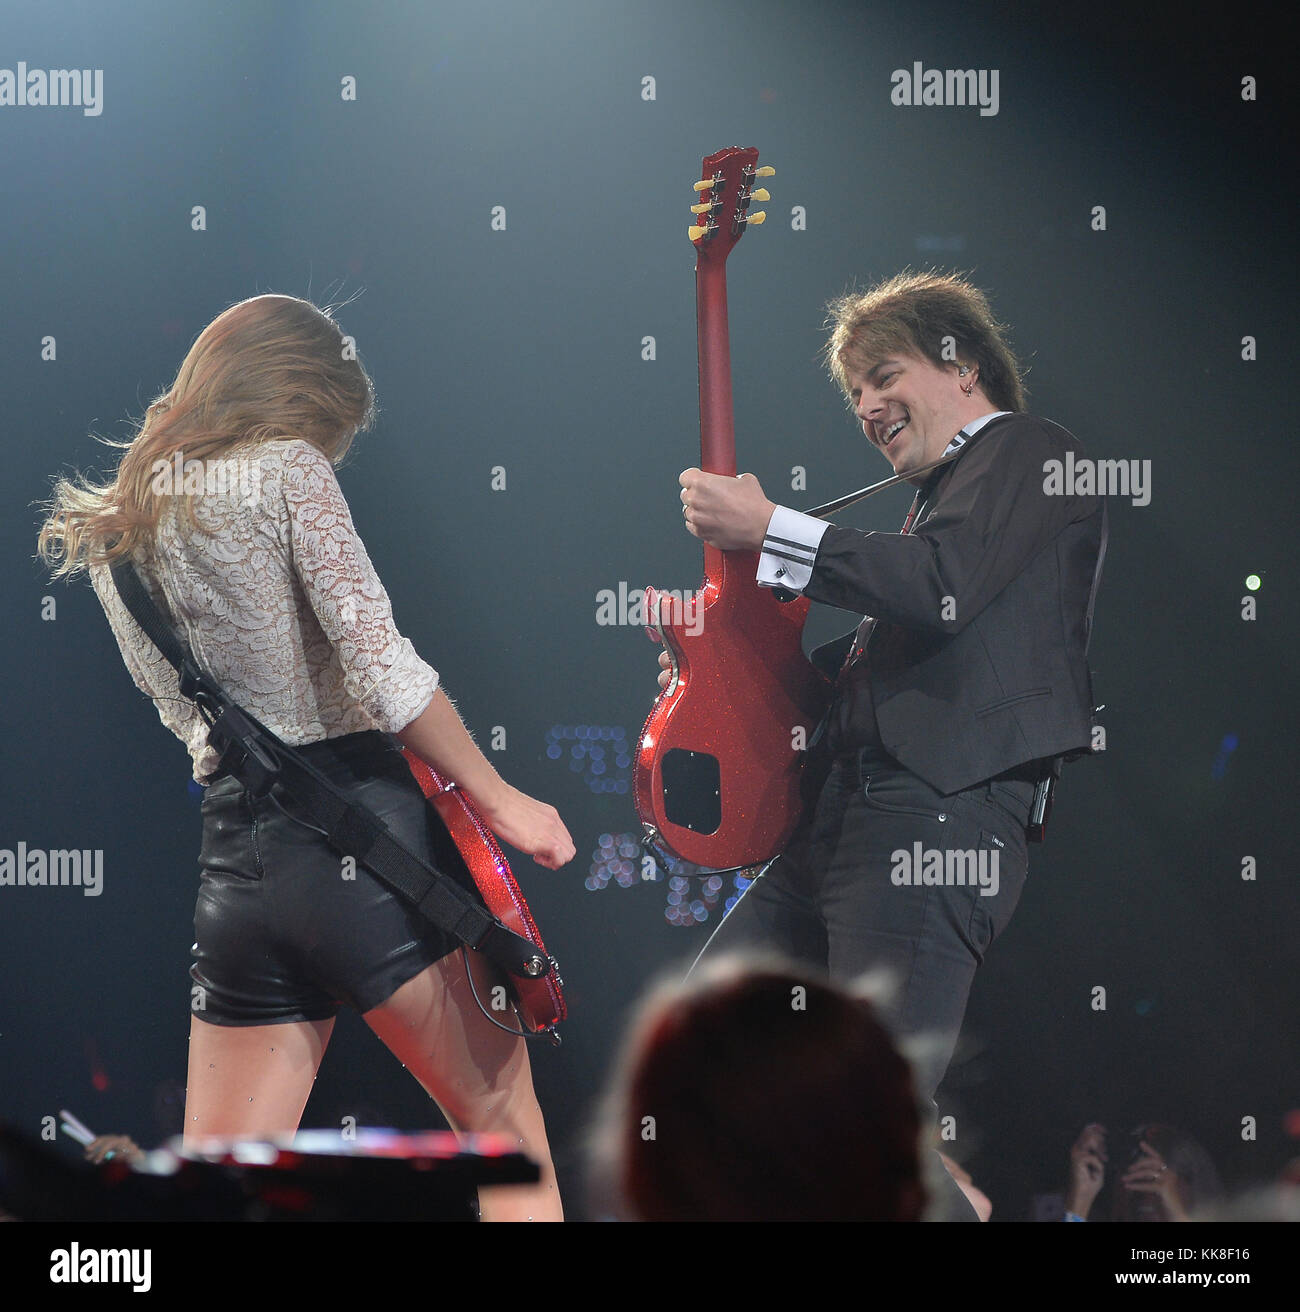 ATLANTA, GA - APRIL 18: Seven-Time Grammy winner Taylor Swift  (born December 13, 1989) performs The RED Tour at the Philips Arena on April 18, 2013 in Atlanta, Georgia  People:  Taylor Swift Stock Photo